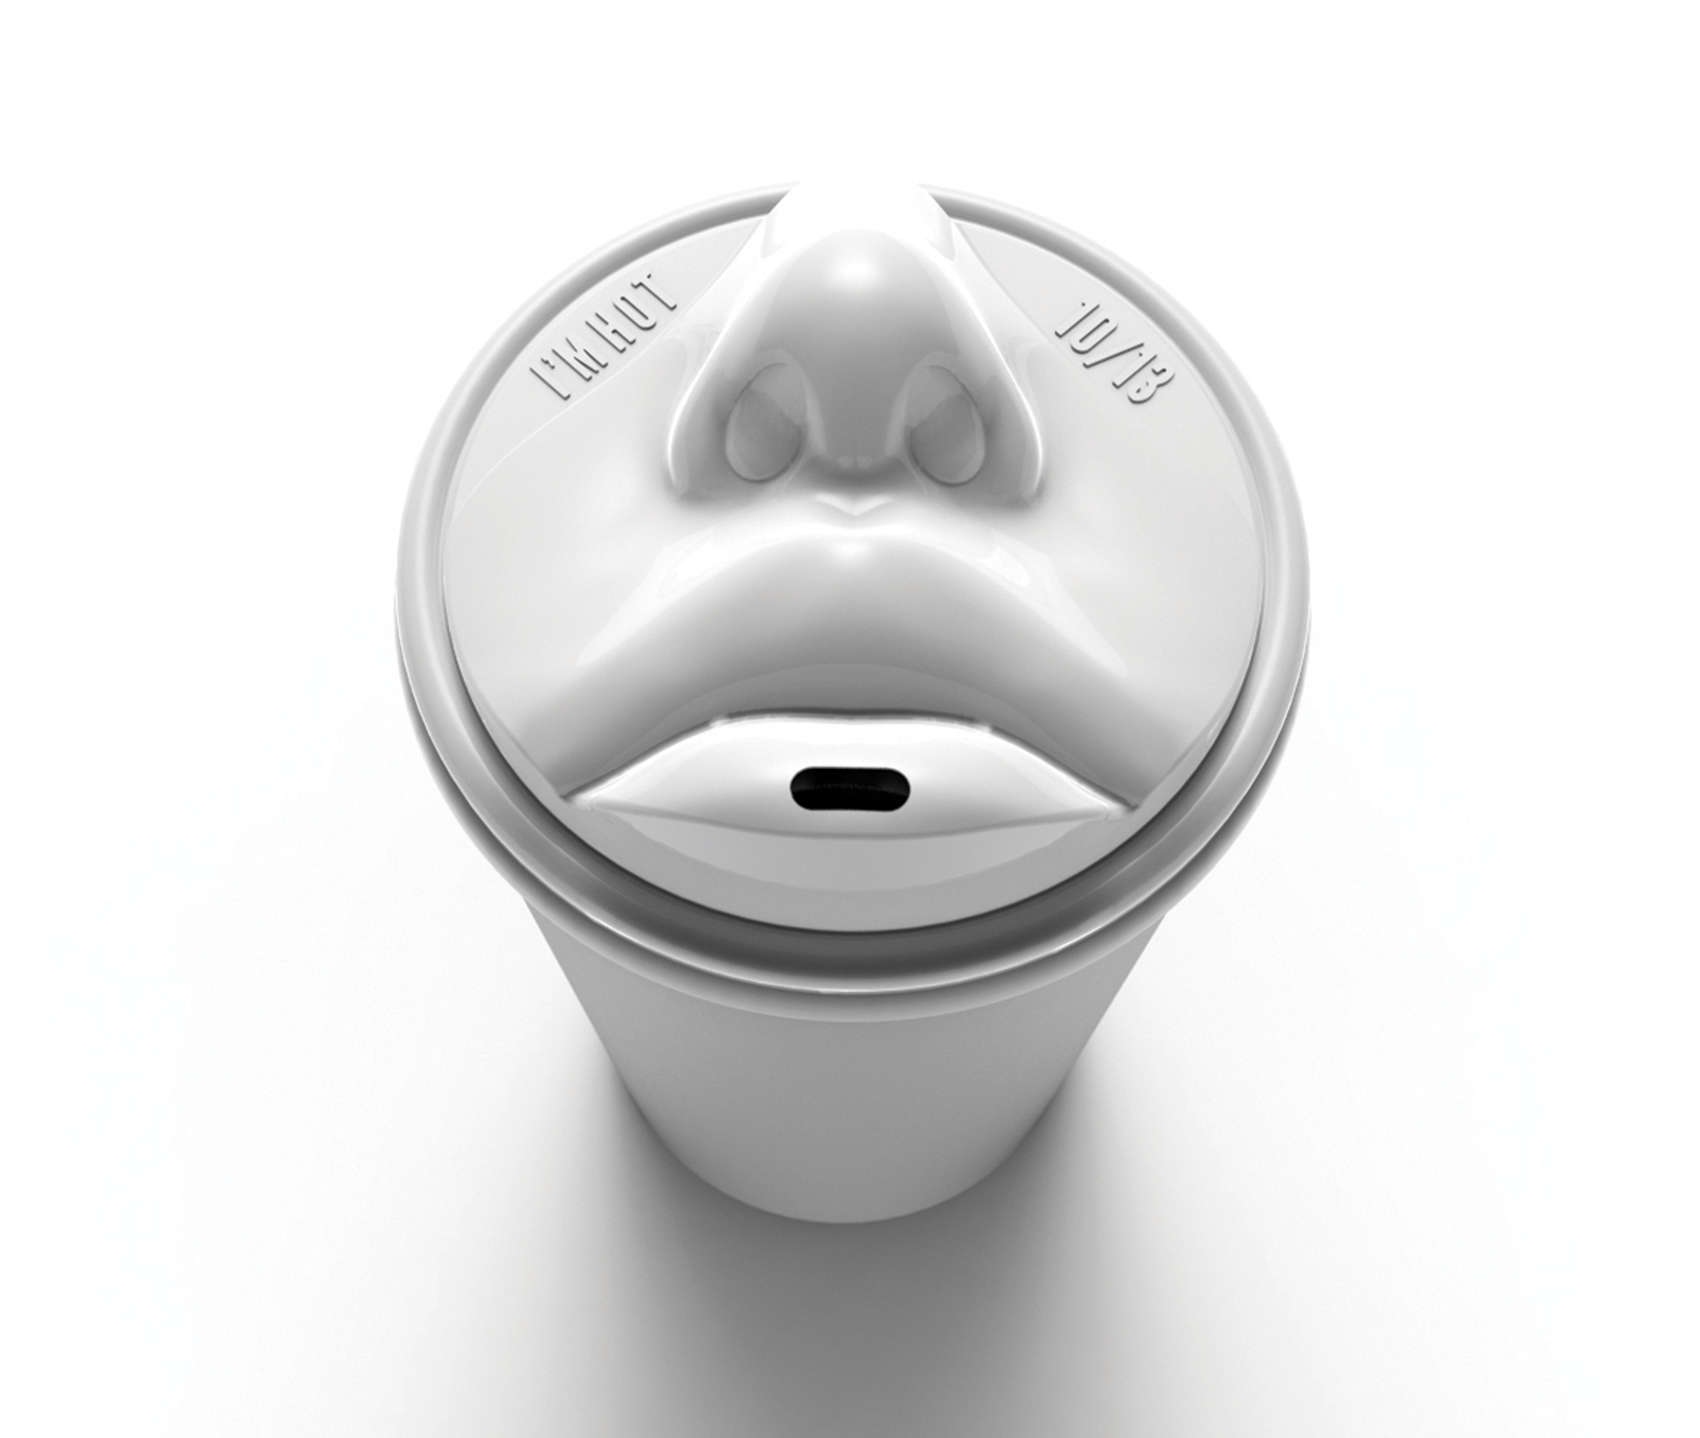 This coffee cup lid will let you drink from its delicious lips and include an awkward touching of noses.